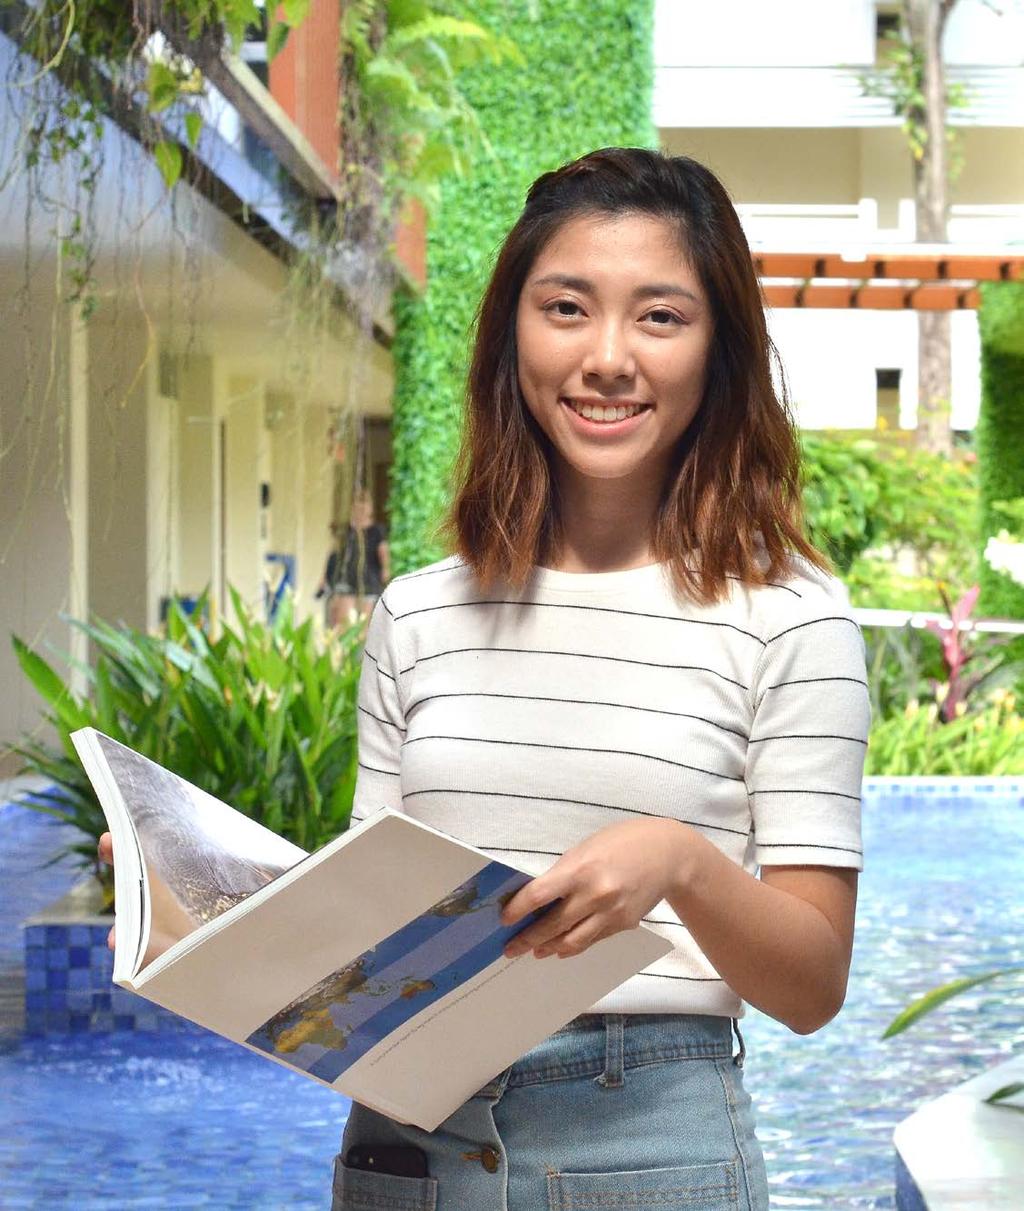 Acacia Lee Master of Psychology (Clinical) Here at JCU, a holistic view is taken in equipping graduates in terms of both advanced theoretical and practical knowledge in preparation for professional